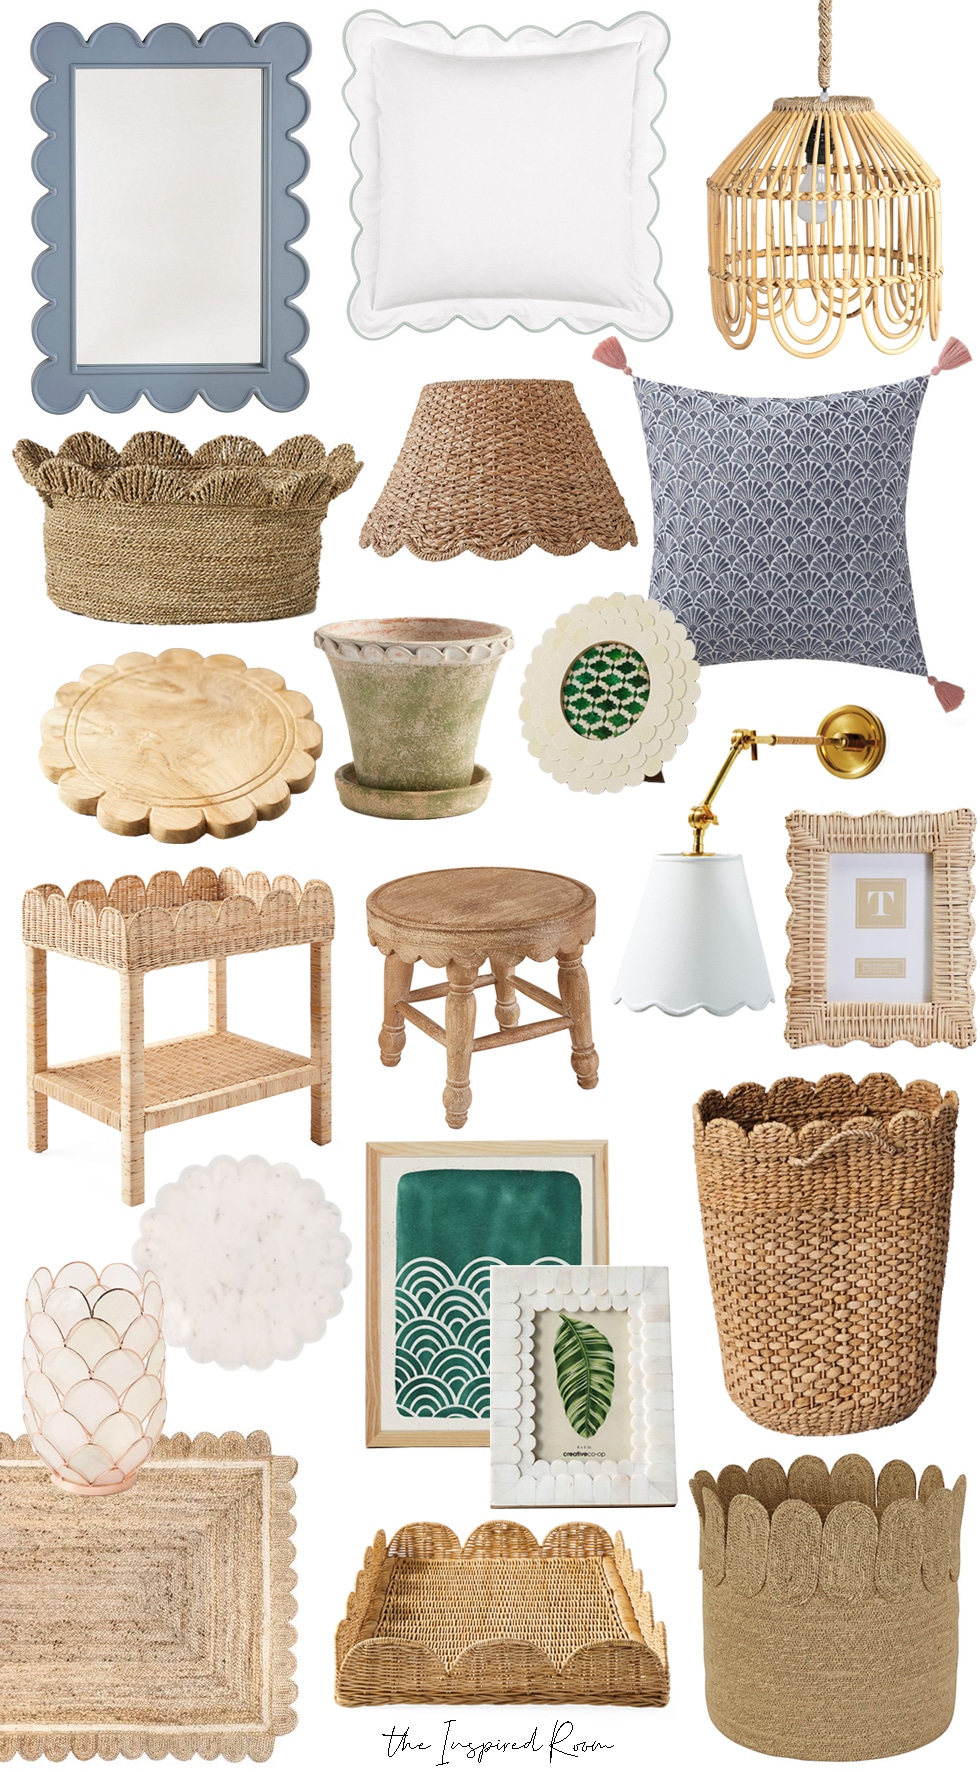 Inspired By: Scalloped Patterns in Decor and Furniture